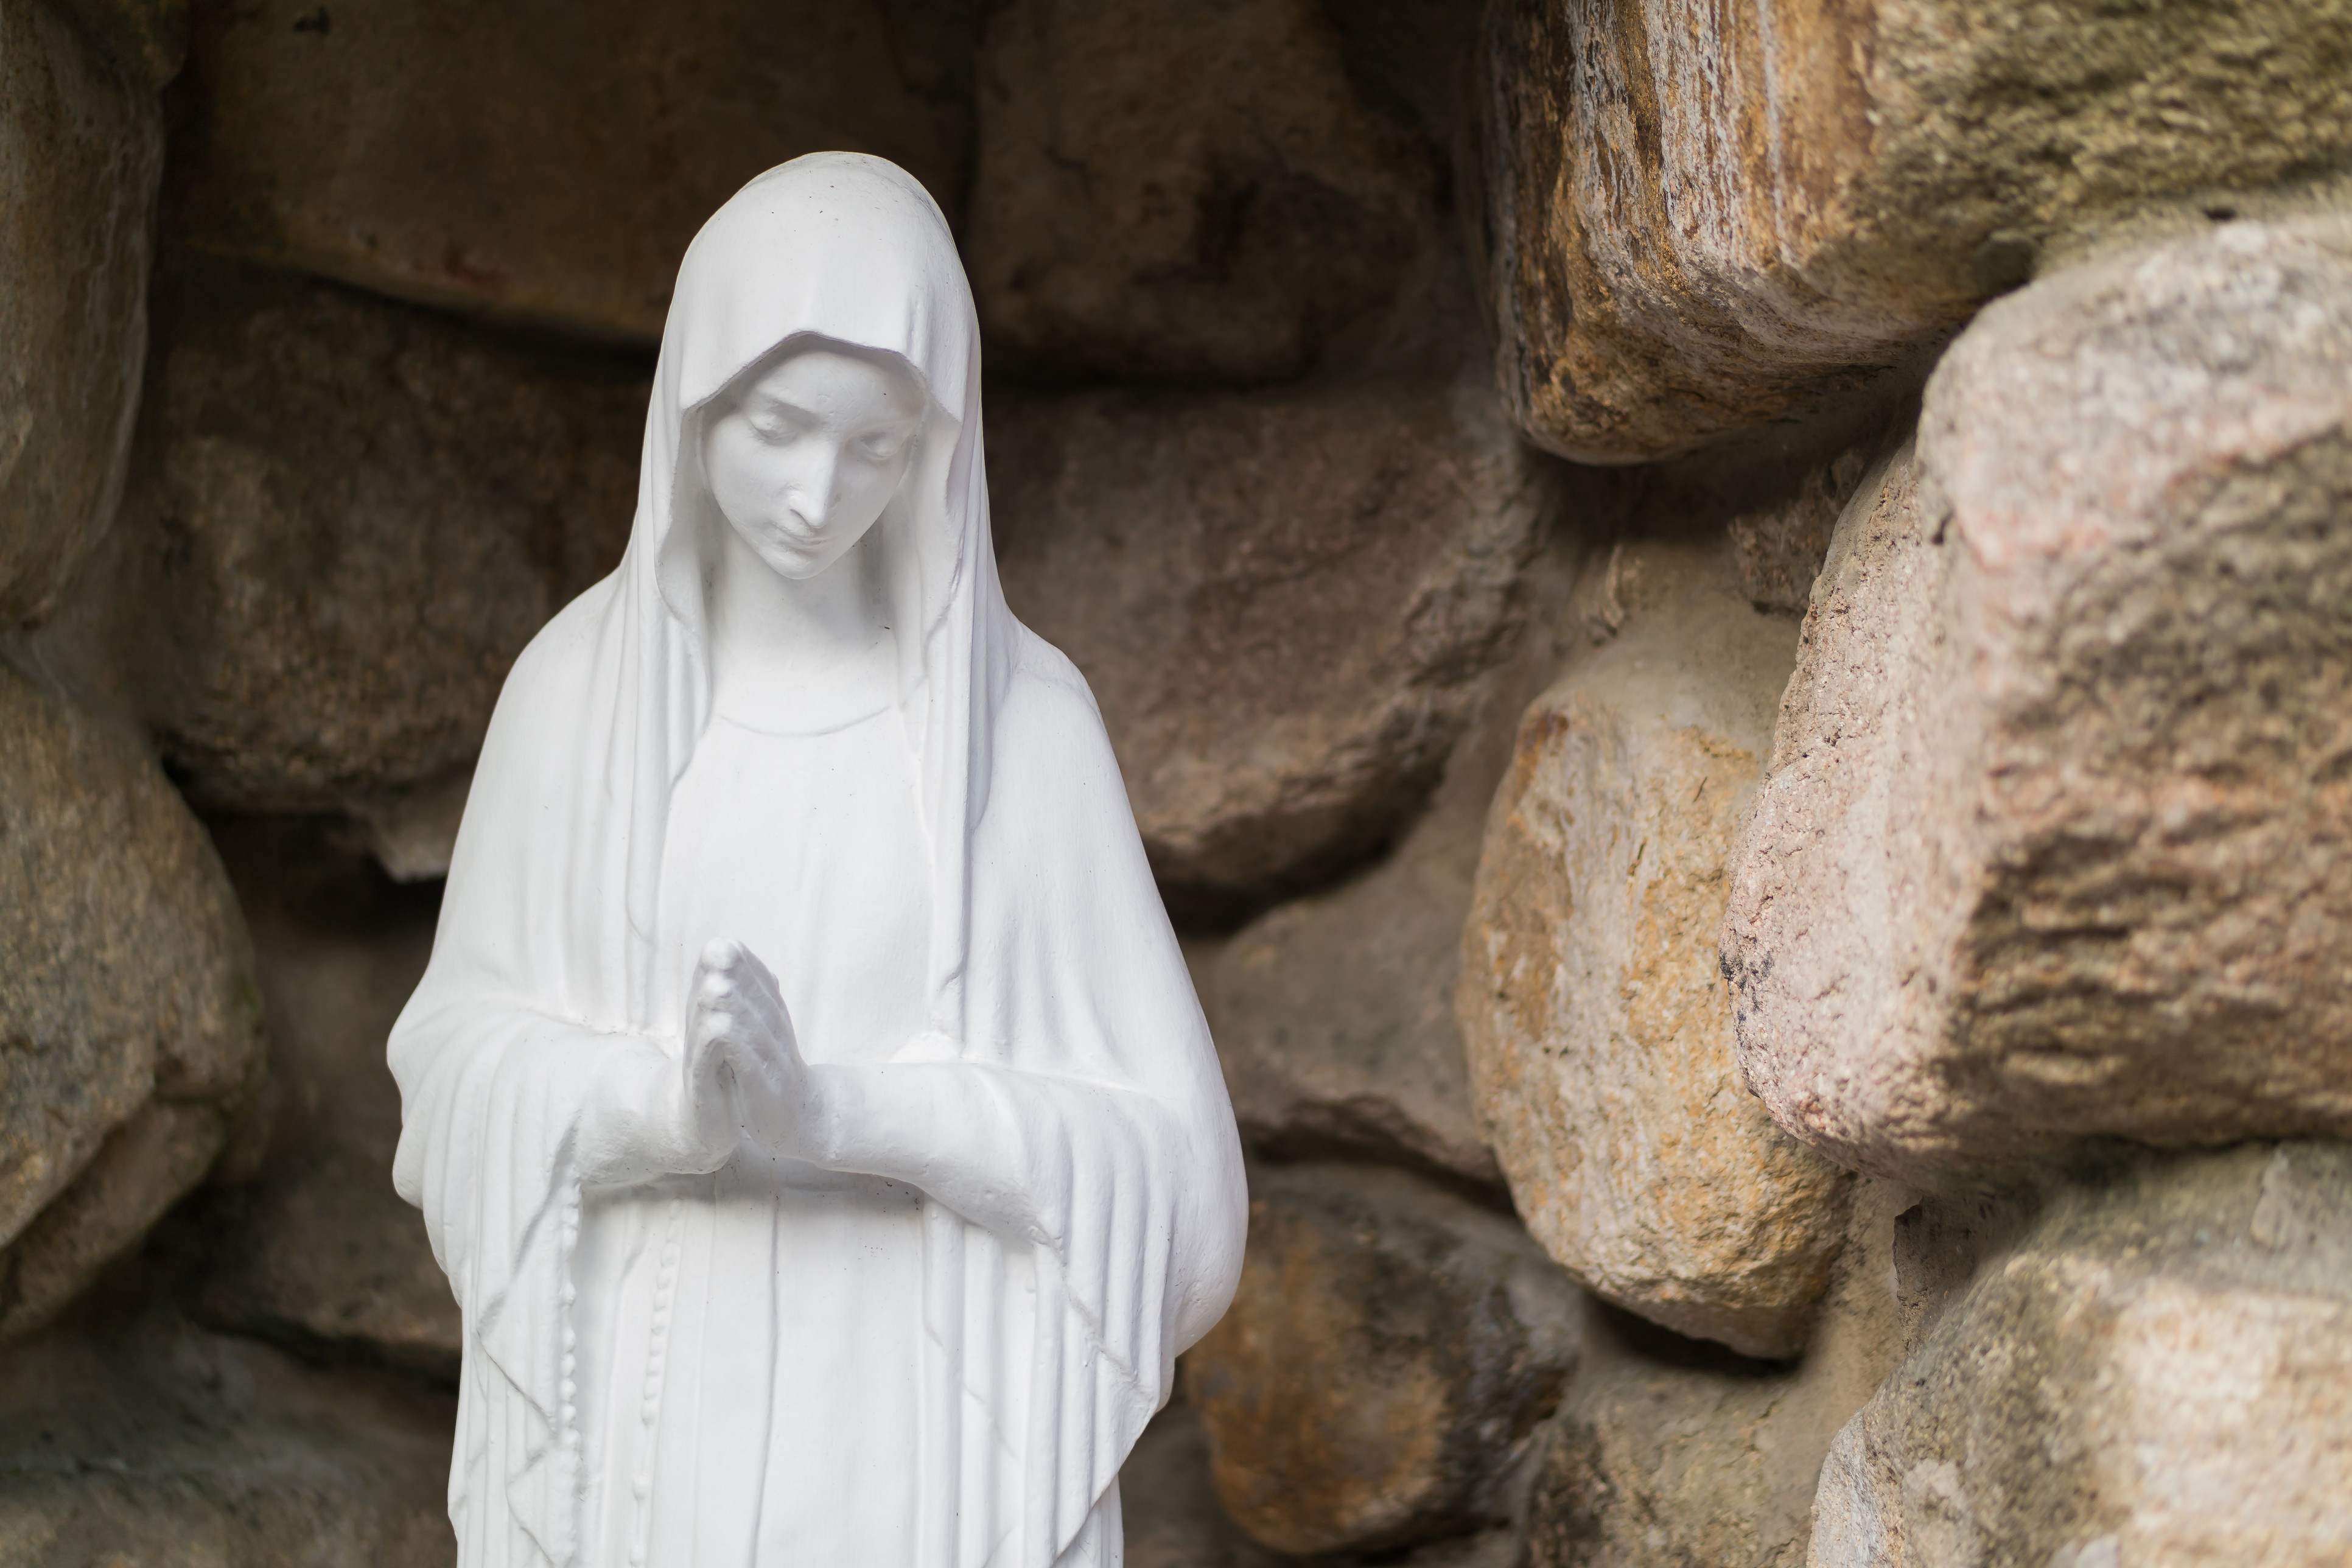 Solemnity Of The Immaculate Conception: Family Reflection Video